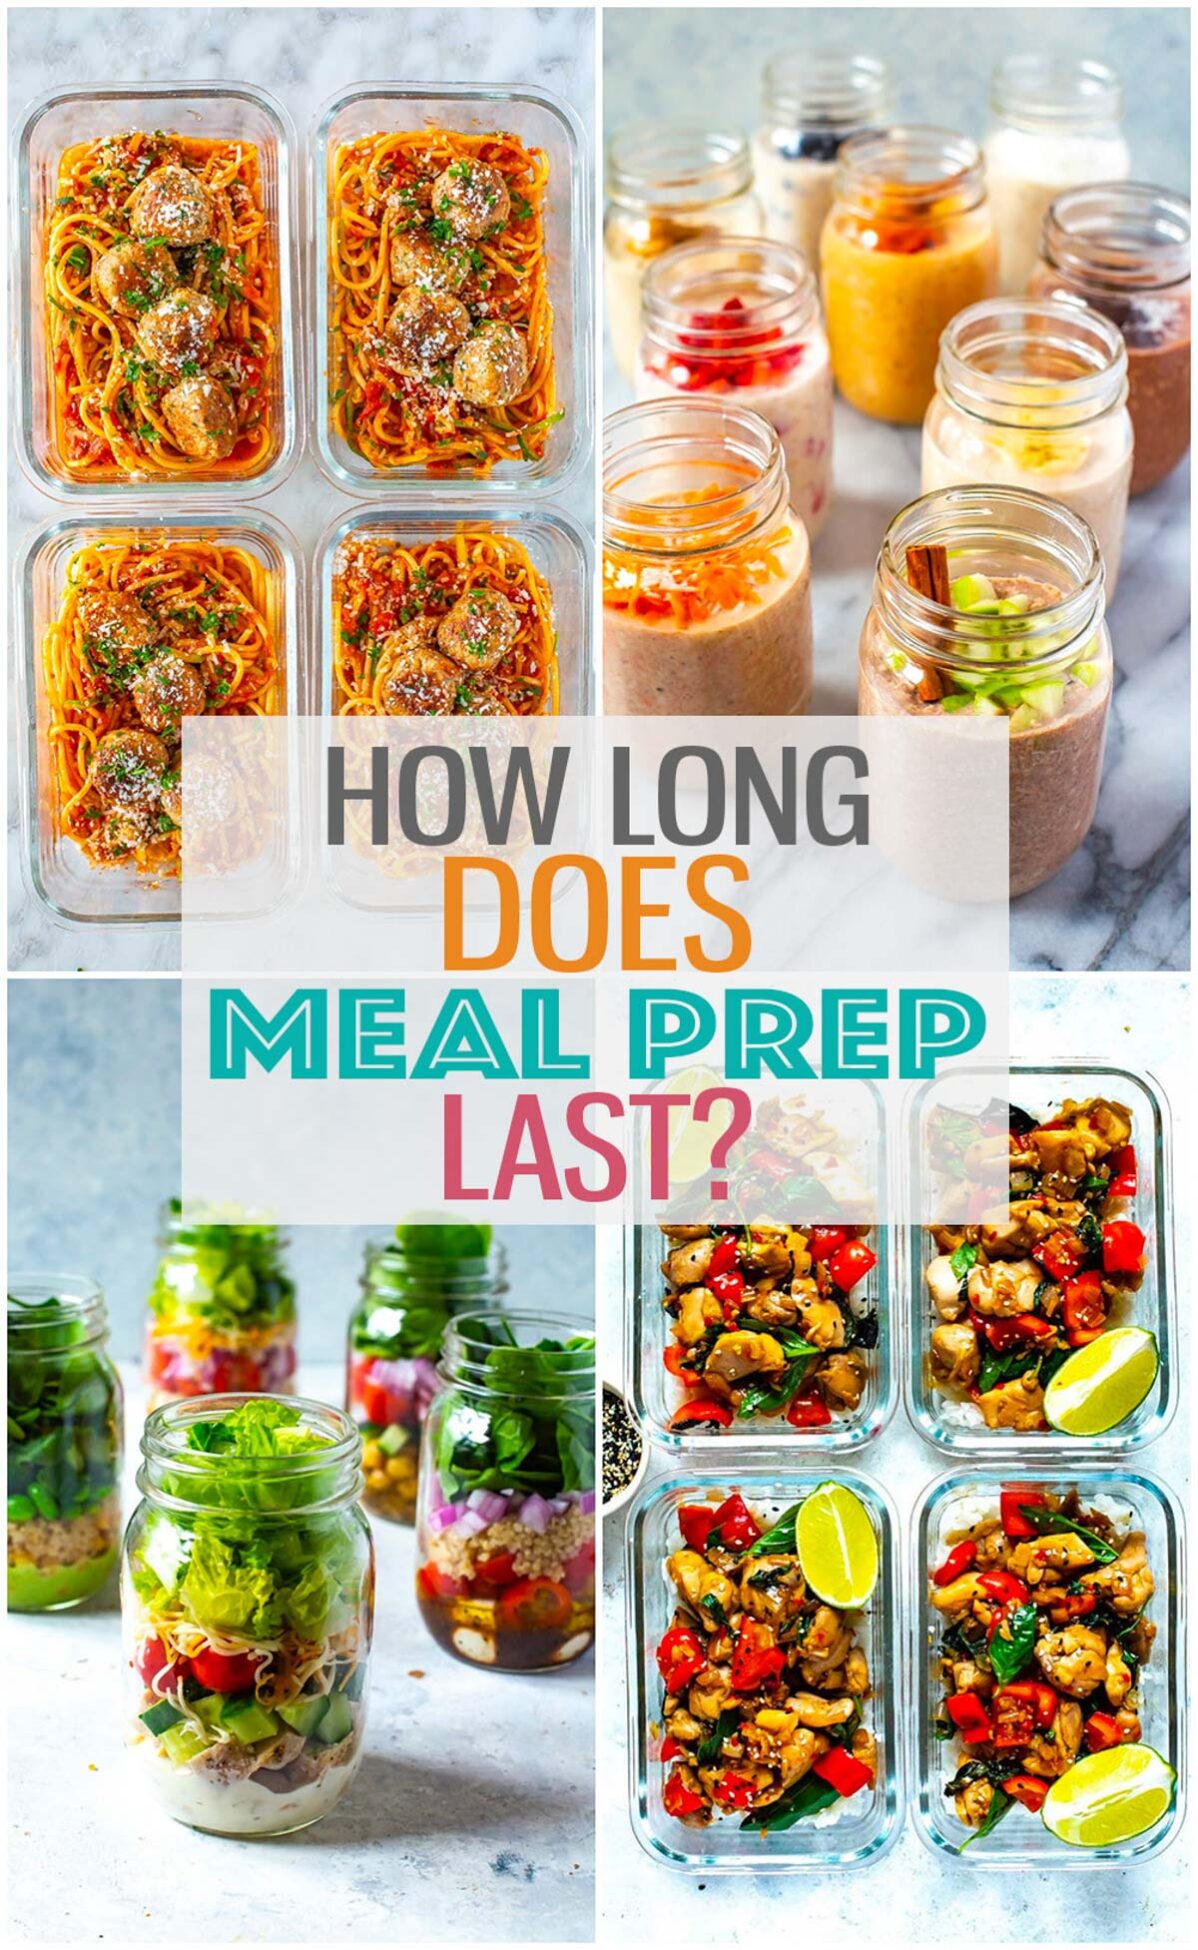 A collage of 4 different meal prep recipes with the text "How Long Does Meal Prep Last?" layered over top.